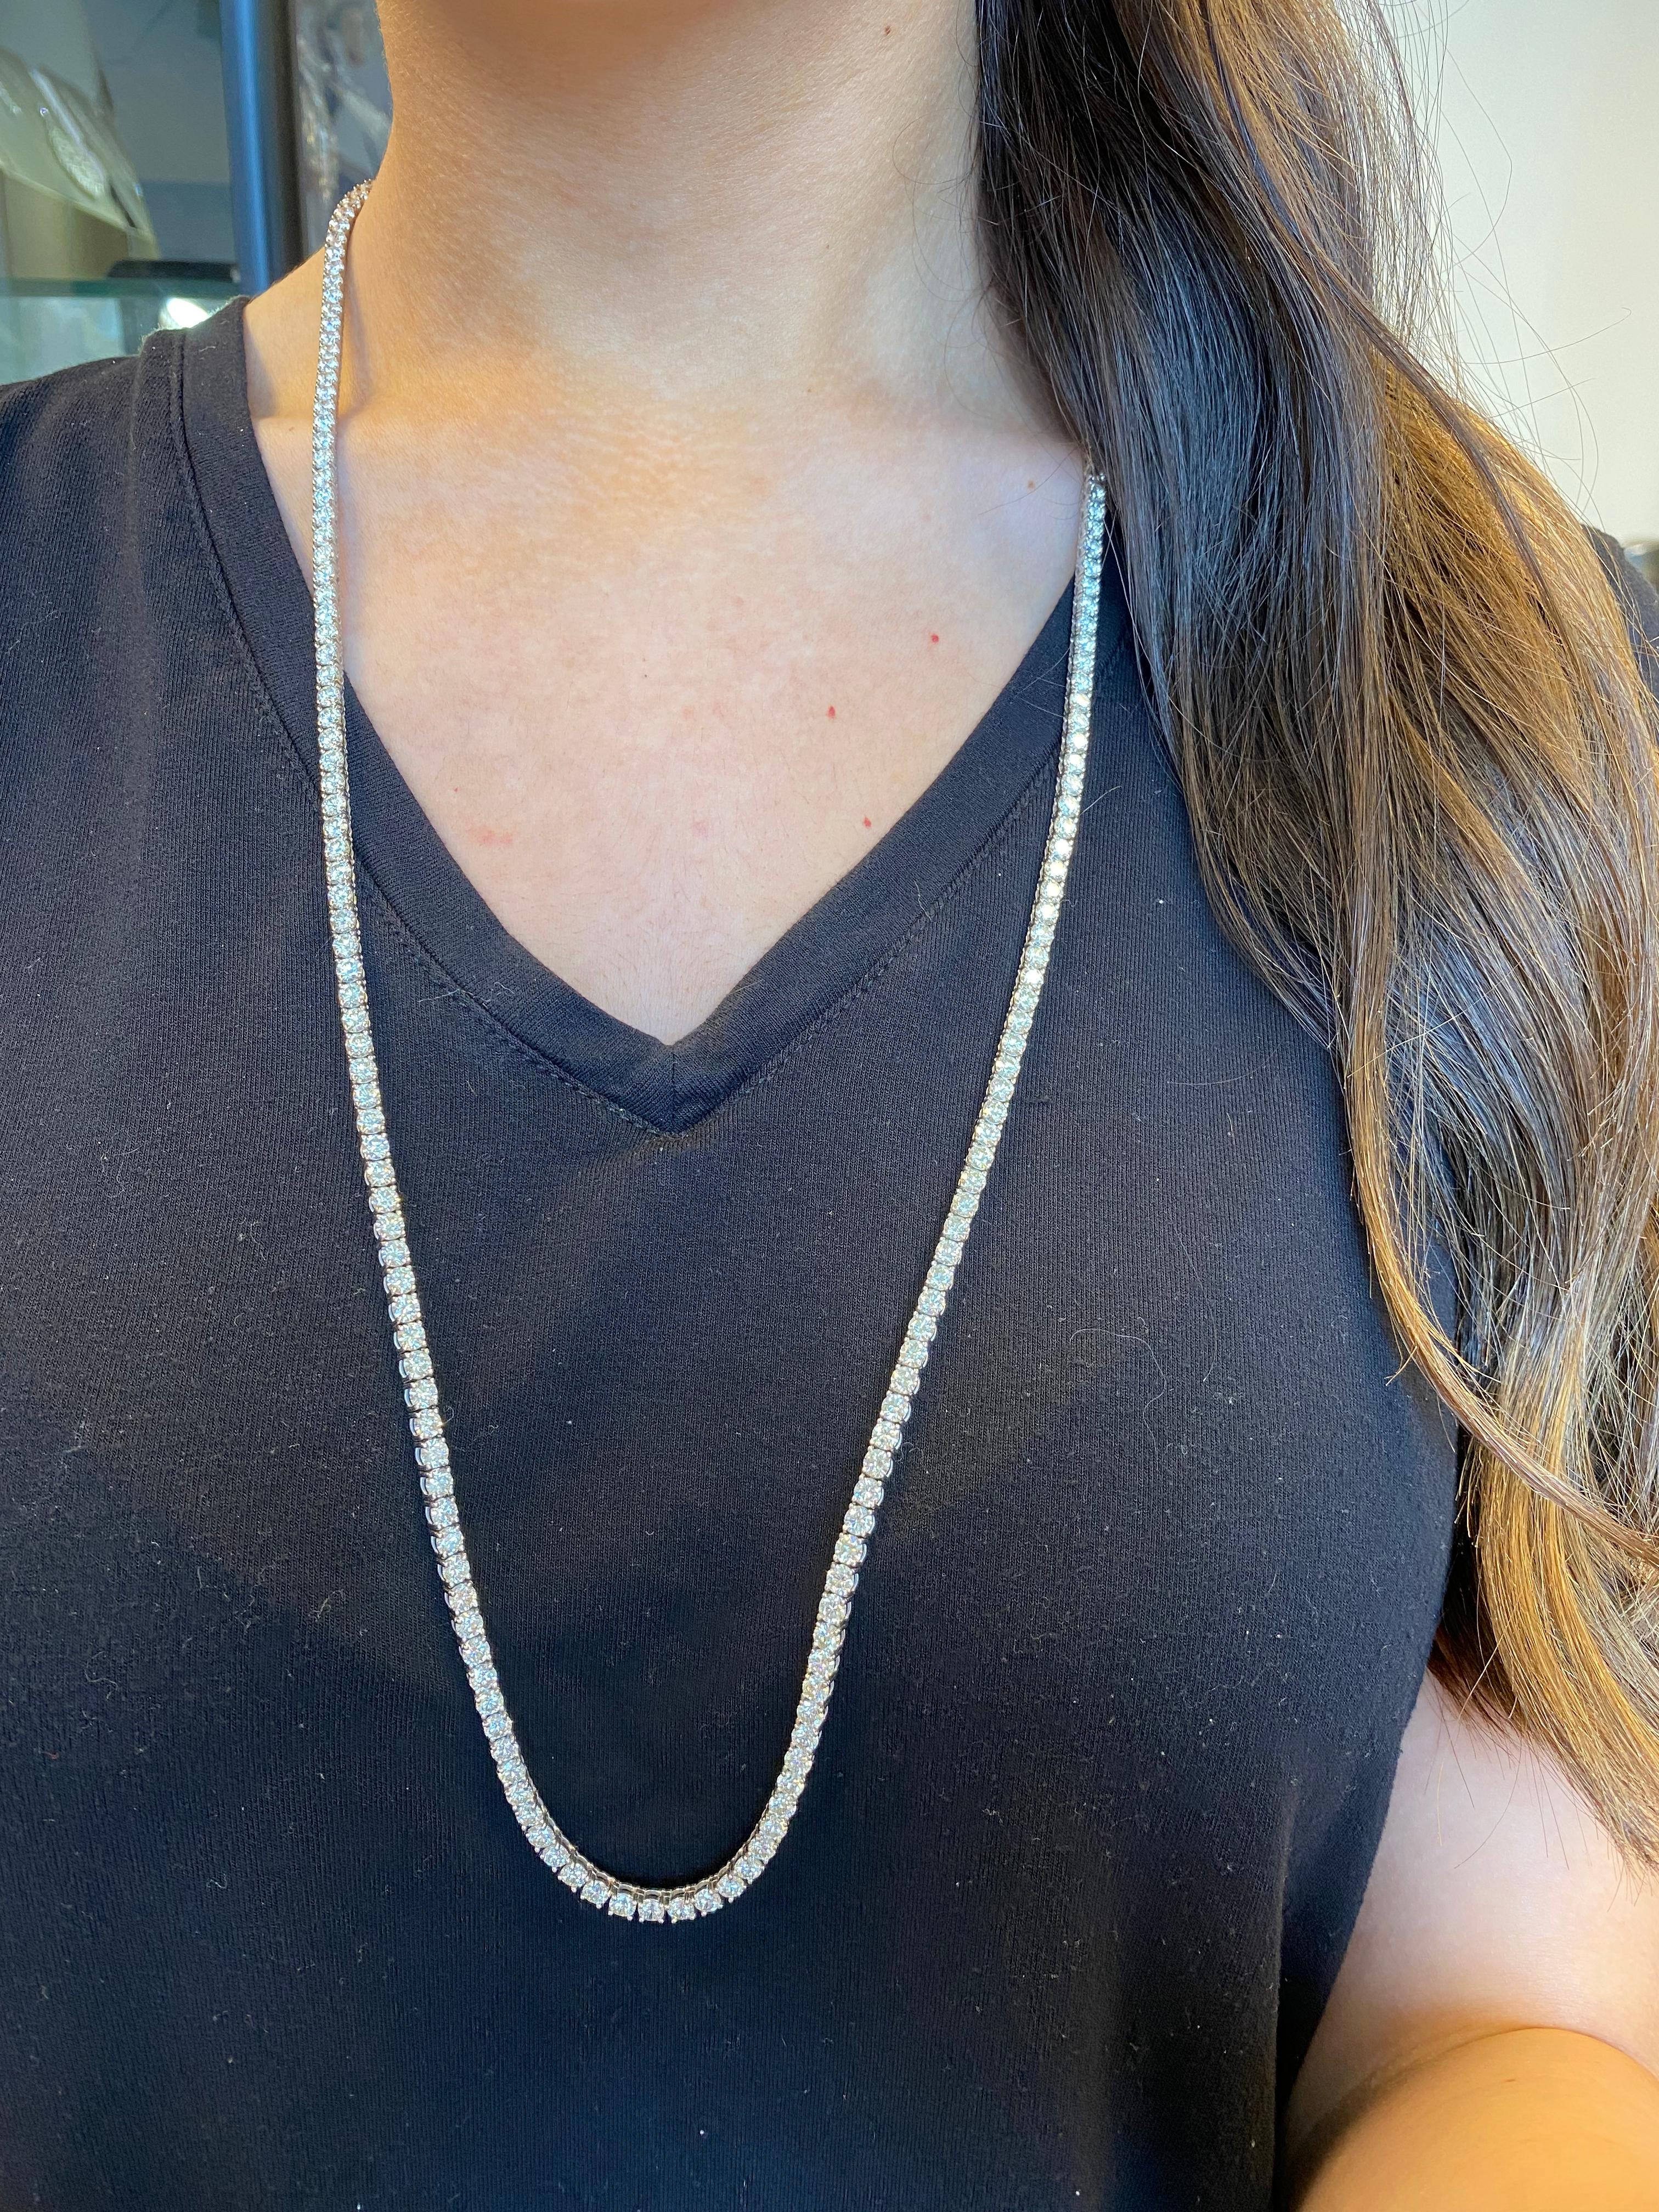 Exquisite and timeless diamonds tennis necklace. High jewelry by Alexander Beverly Hills.
205 round brilliant diamonds, 39.07 carats total. Approximately G/H color and SI clarity. Four prong set in 18k white gold, 31 inches
Accommodated with an up